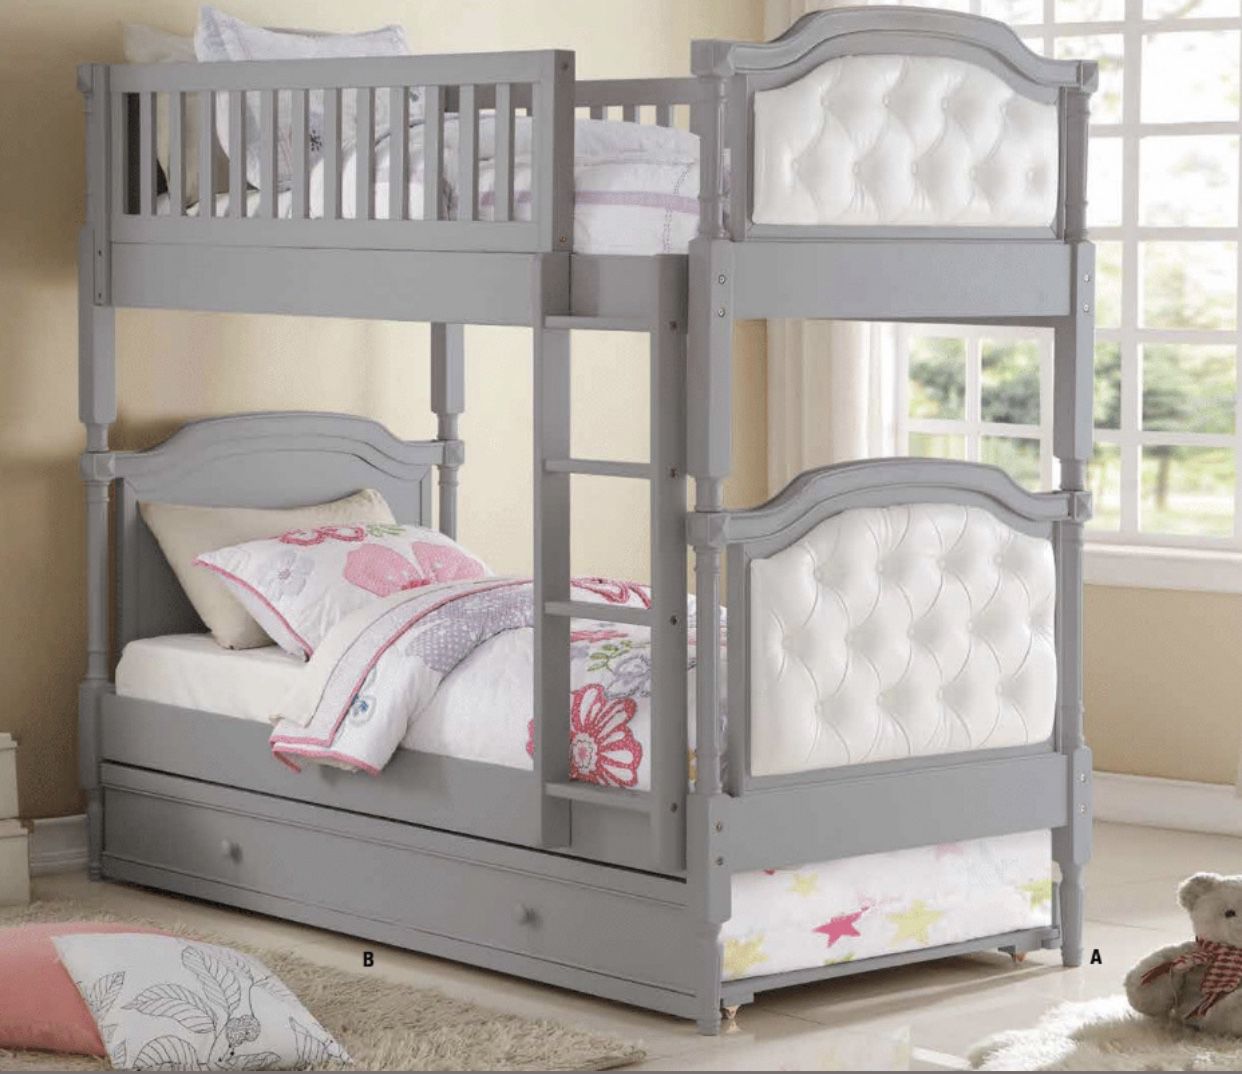 Pottery barn Blythe Bunk Bed And Desk In Gray